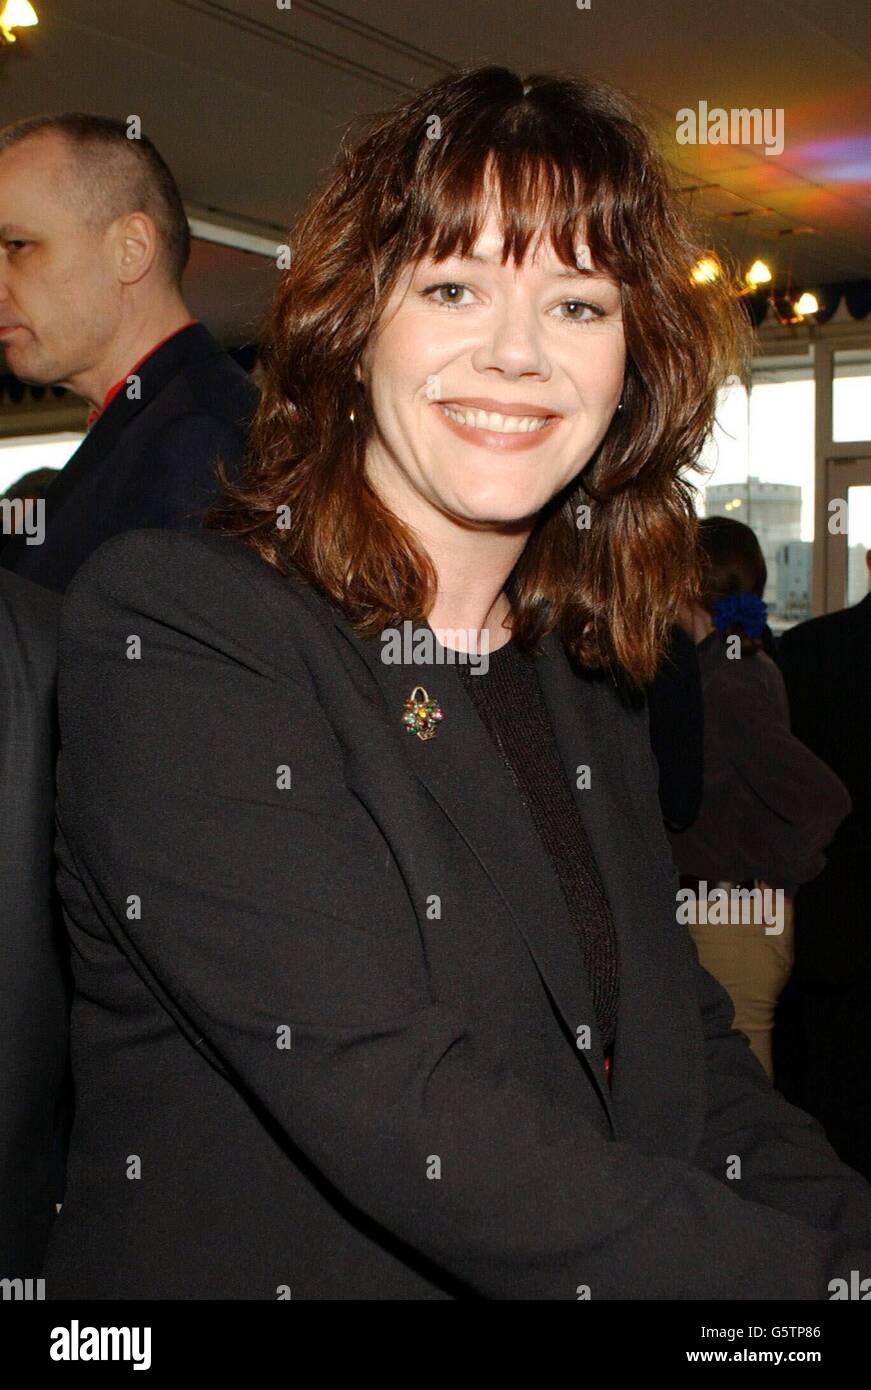 Josie Lawrence during the launch party of Mo Mowlam's autobiography Momentum: The Struggle For Peace, Politics and the People at Westminster Boating Base in London. Stock Photo